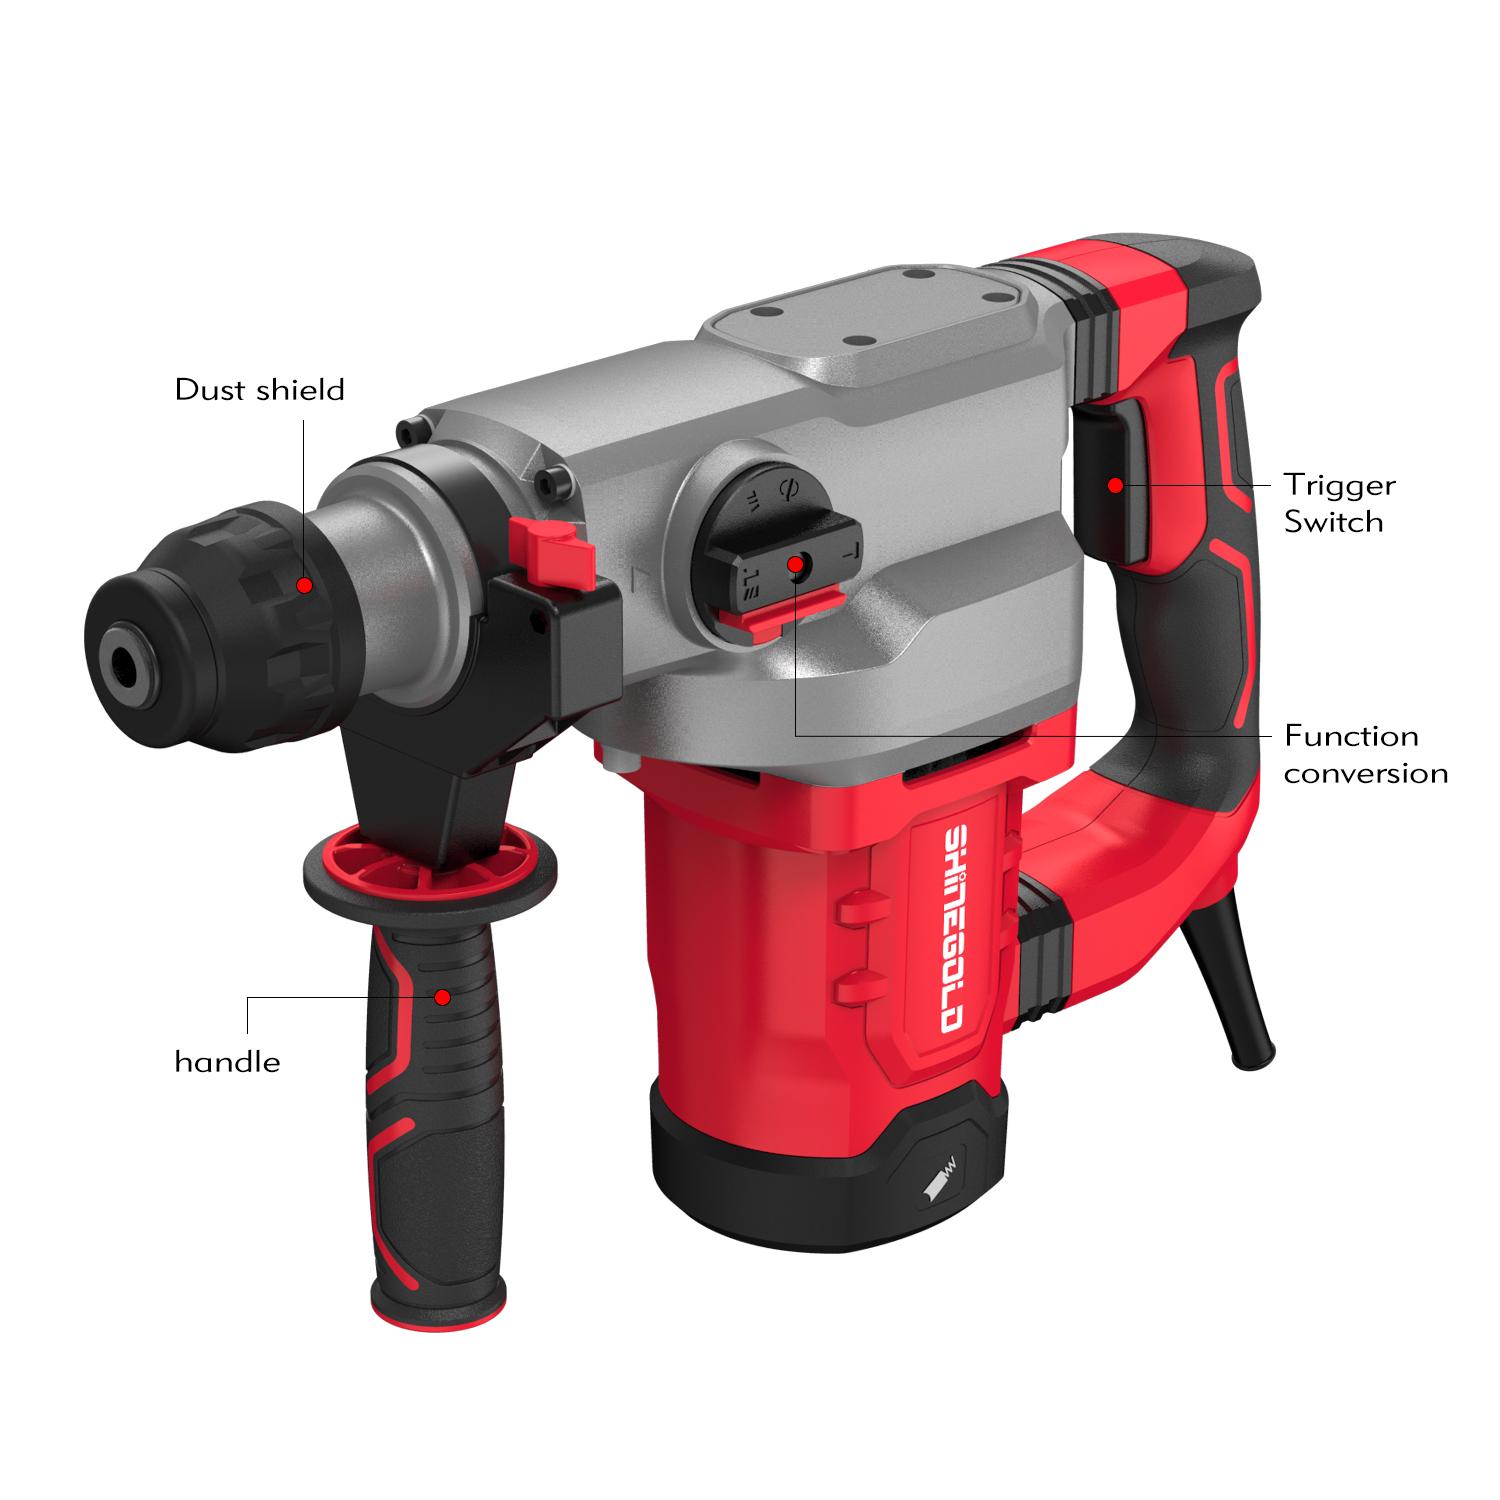 What is the difference between an electric drill and an impact driver?